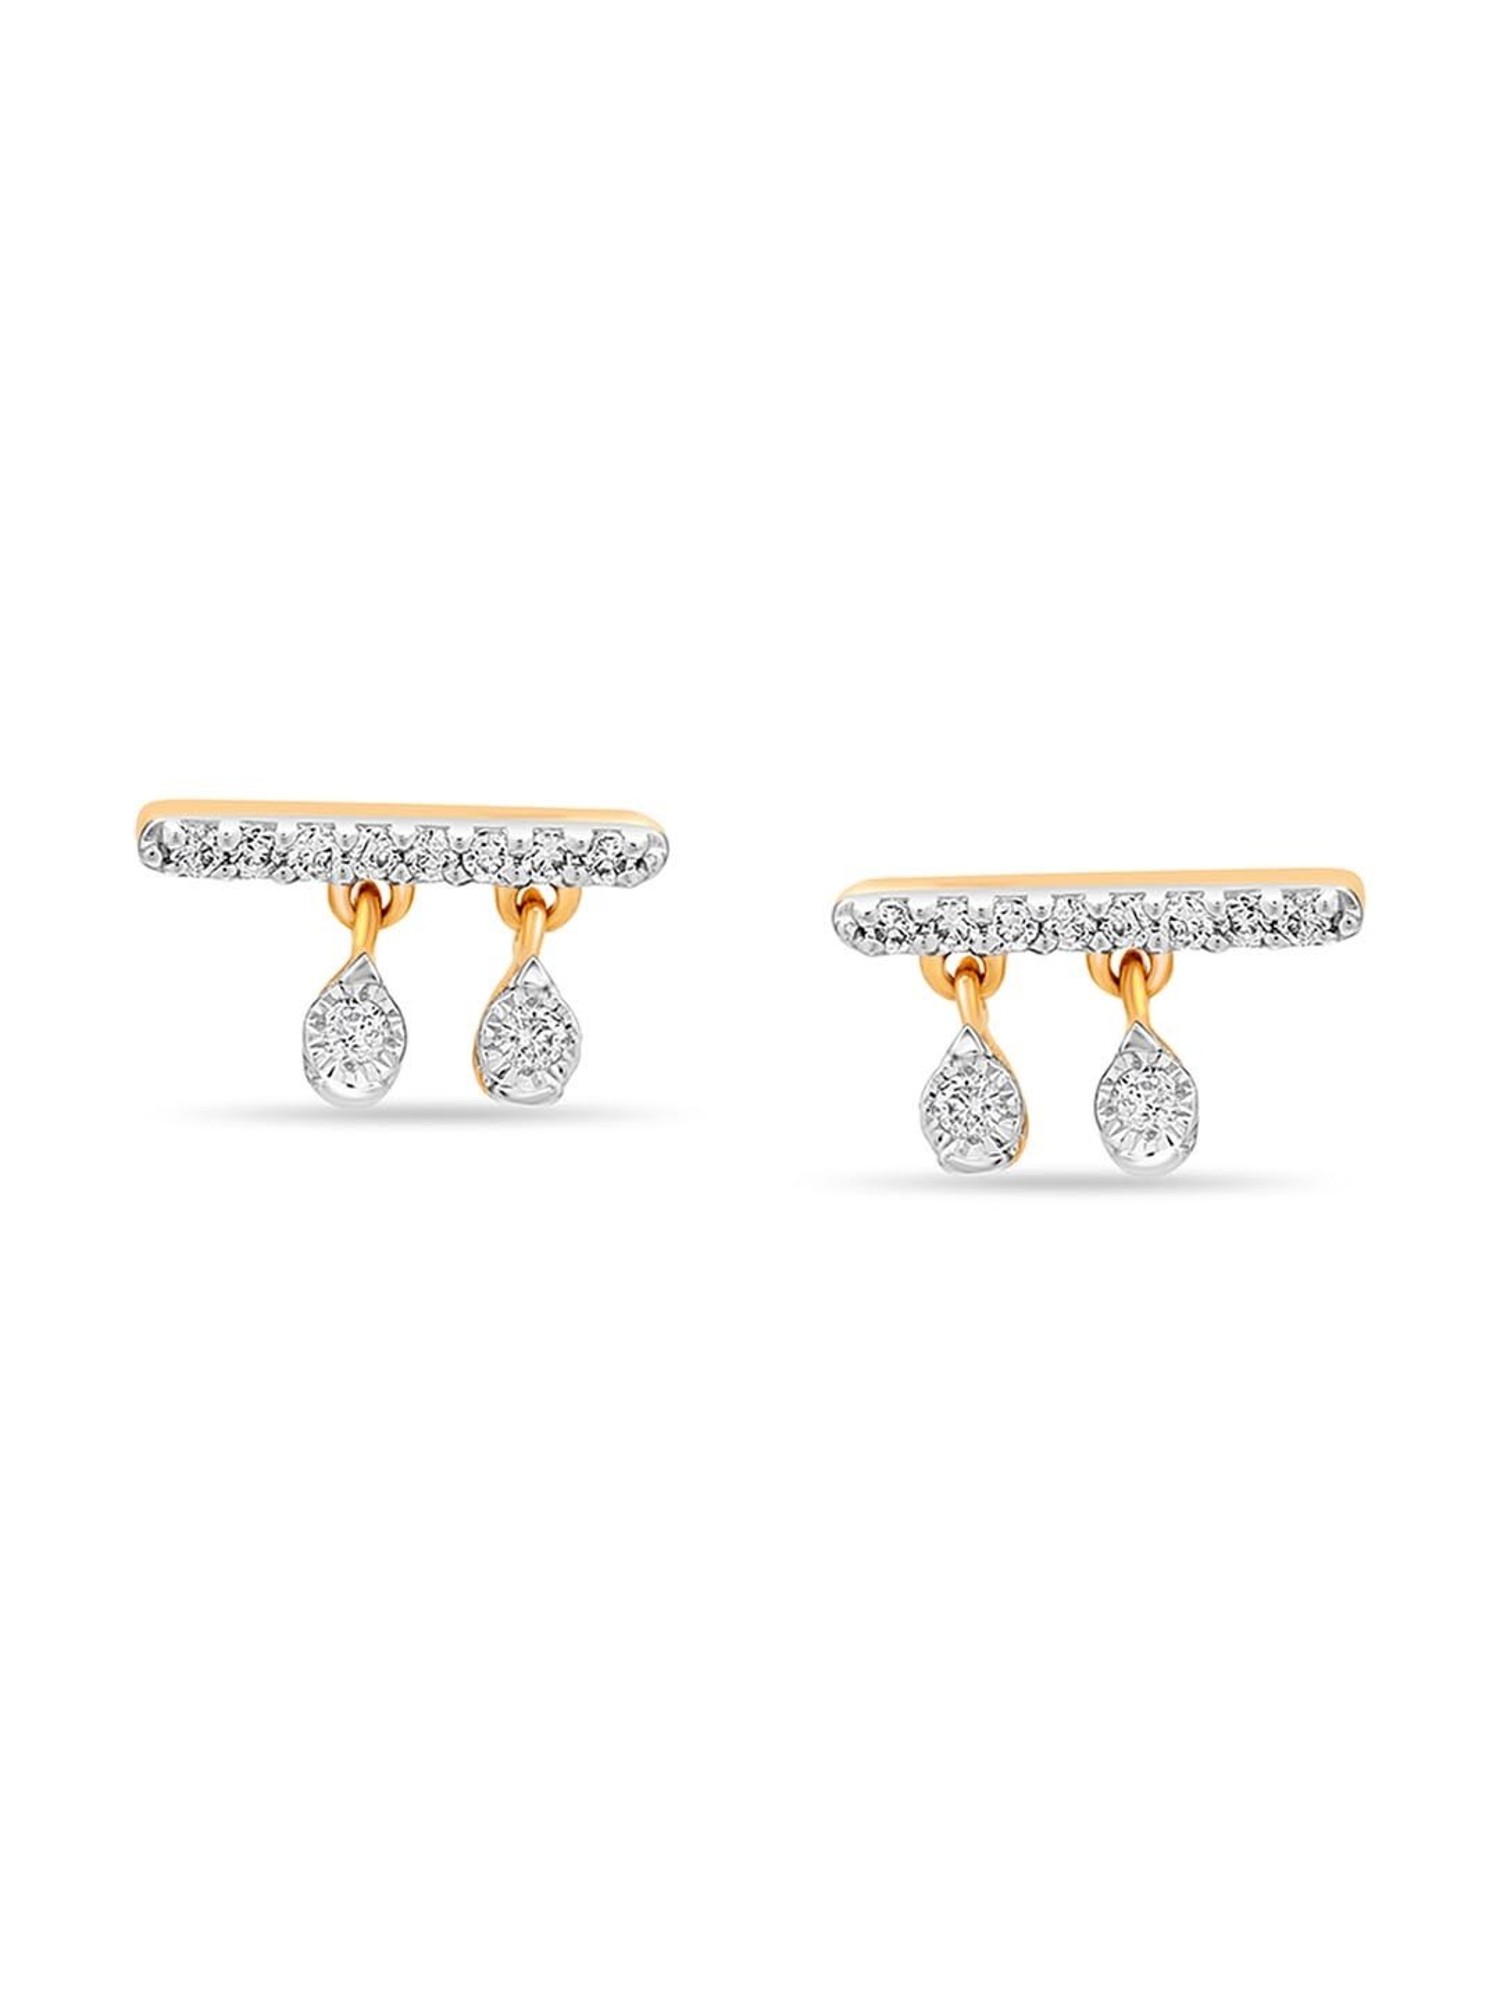 Details more than 178 tanishq gold earrings design